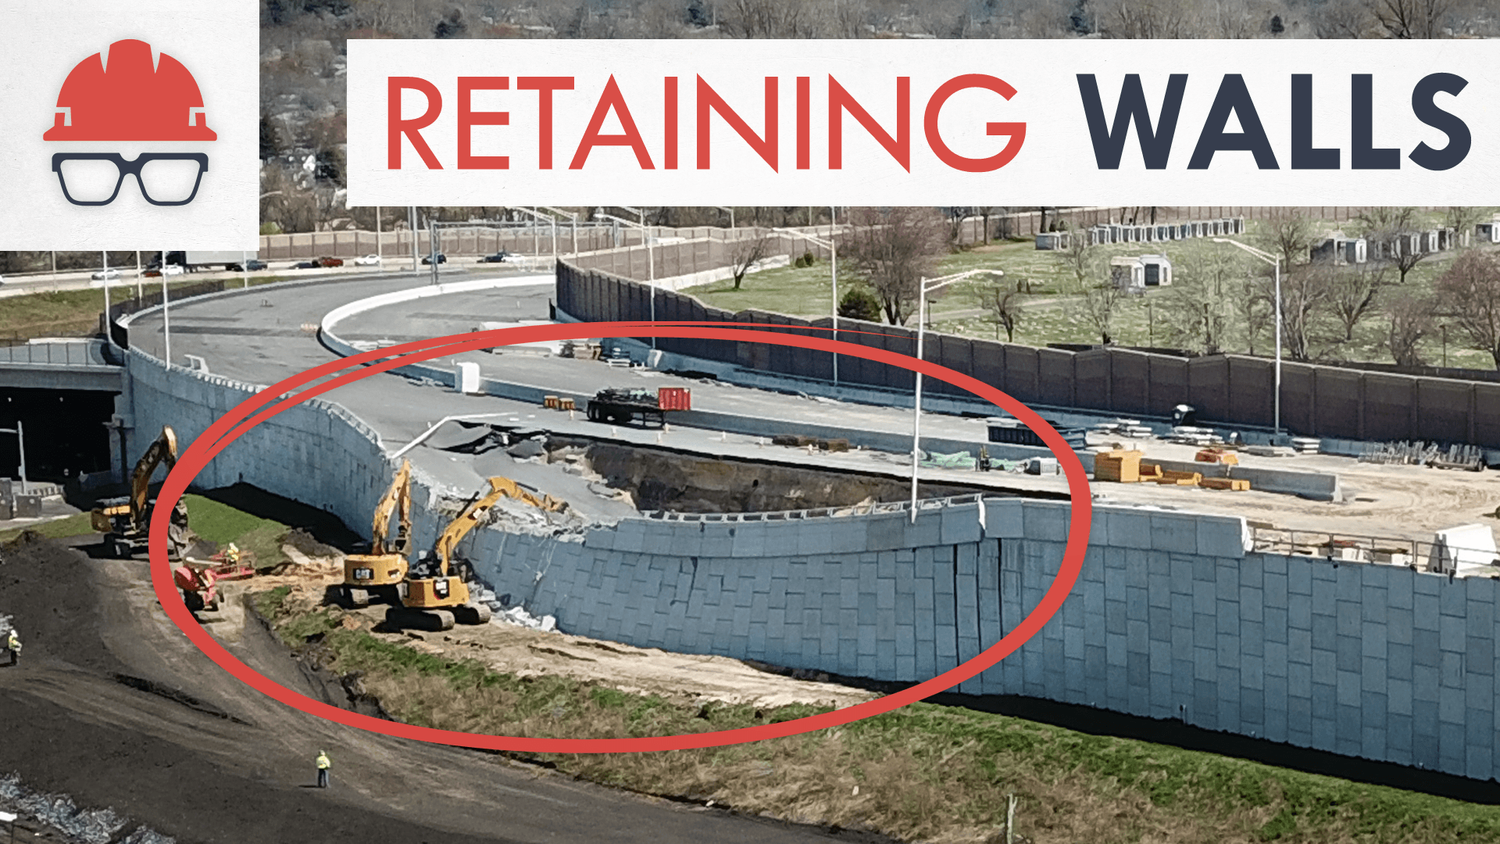 Grady Hillhouse: Why Retaining Walls Collapse